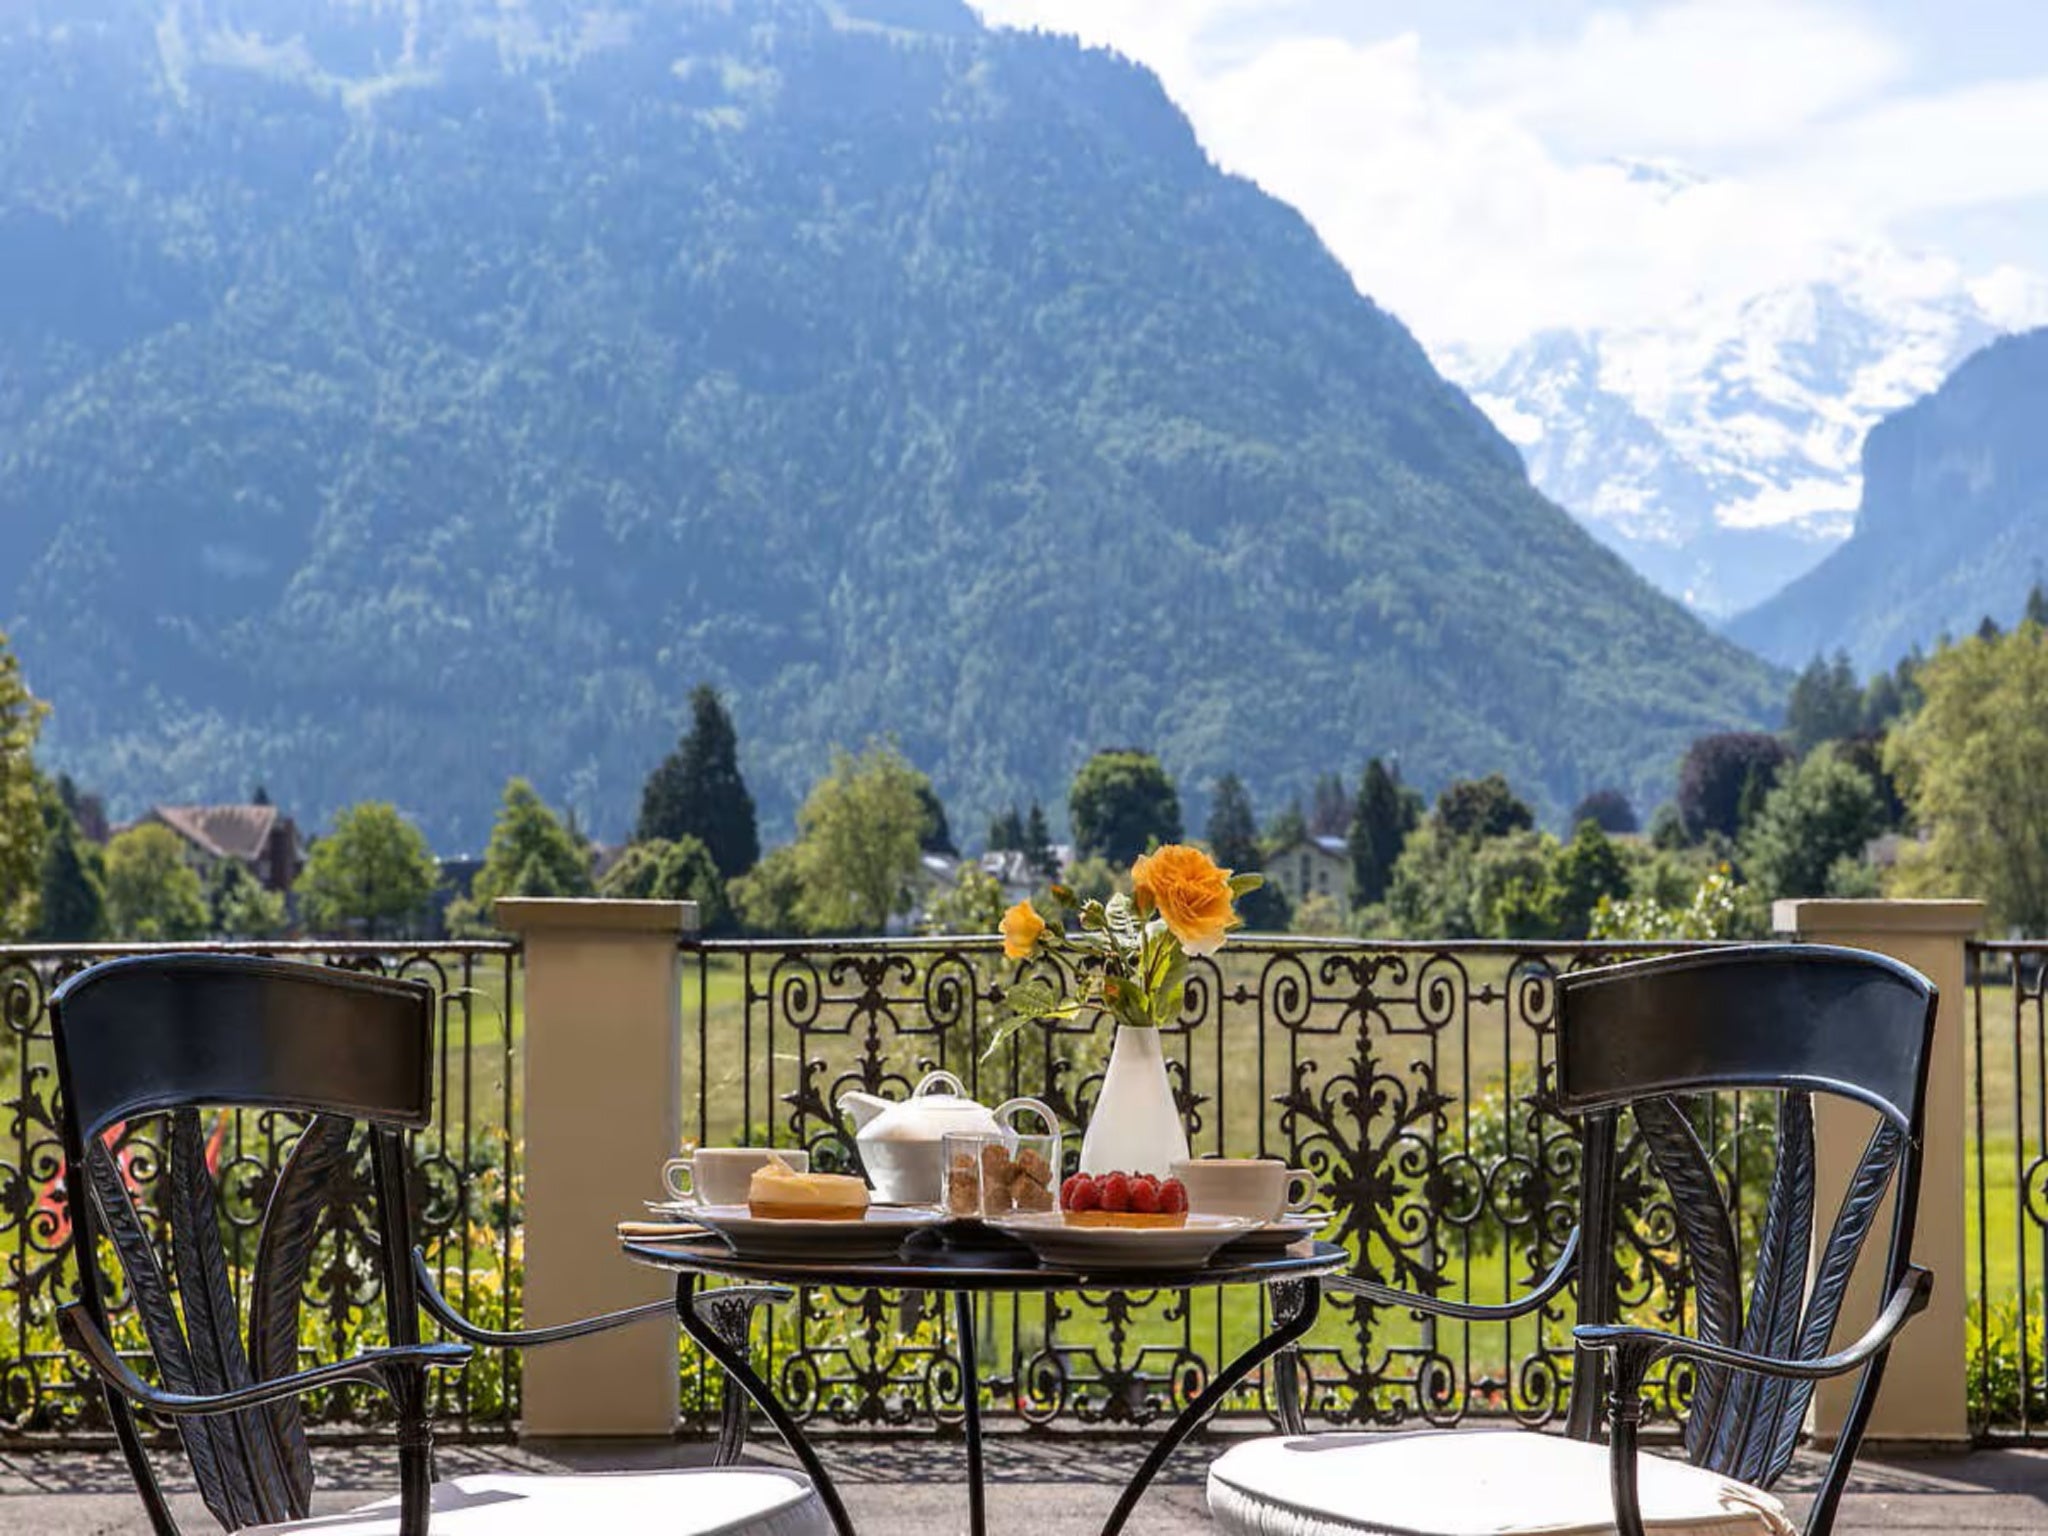 This resort serves up breakfast with a side of mountain views